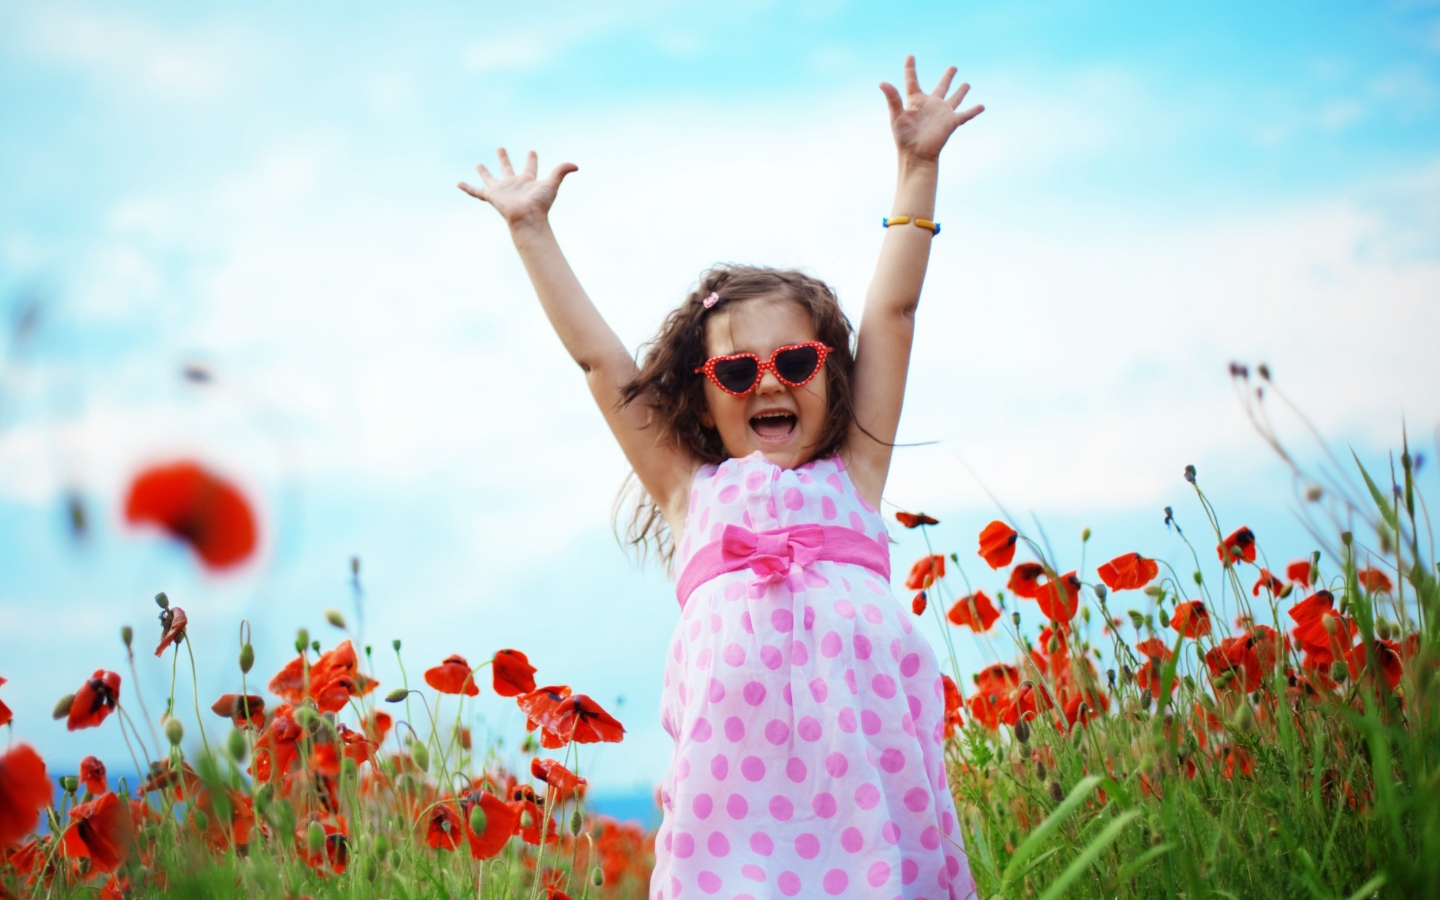 Happy Little Girl In Love With Life wallpaper 1440x900